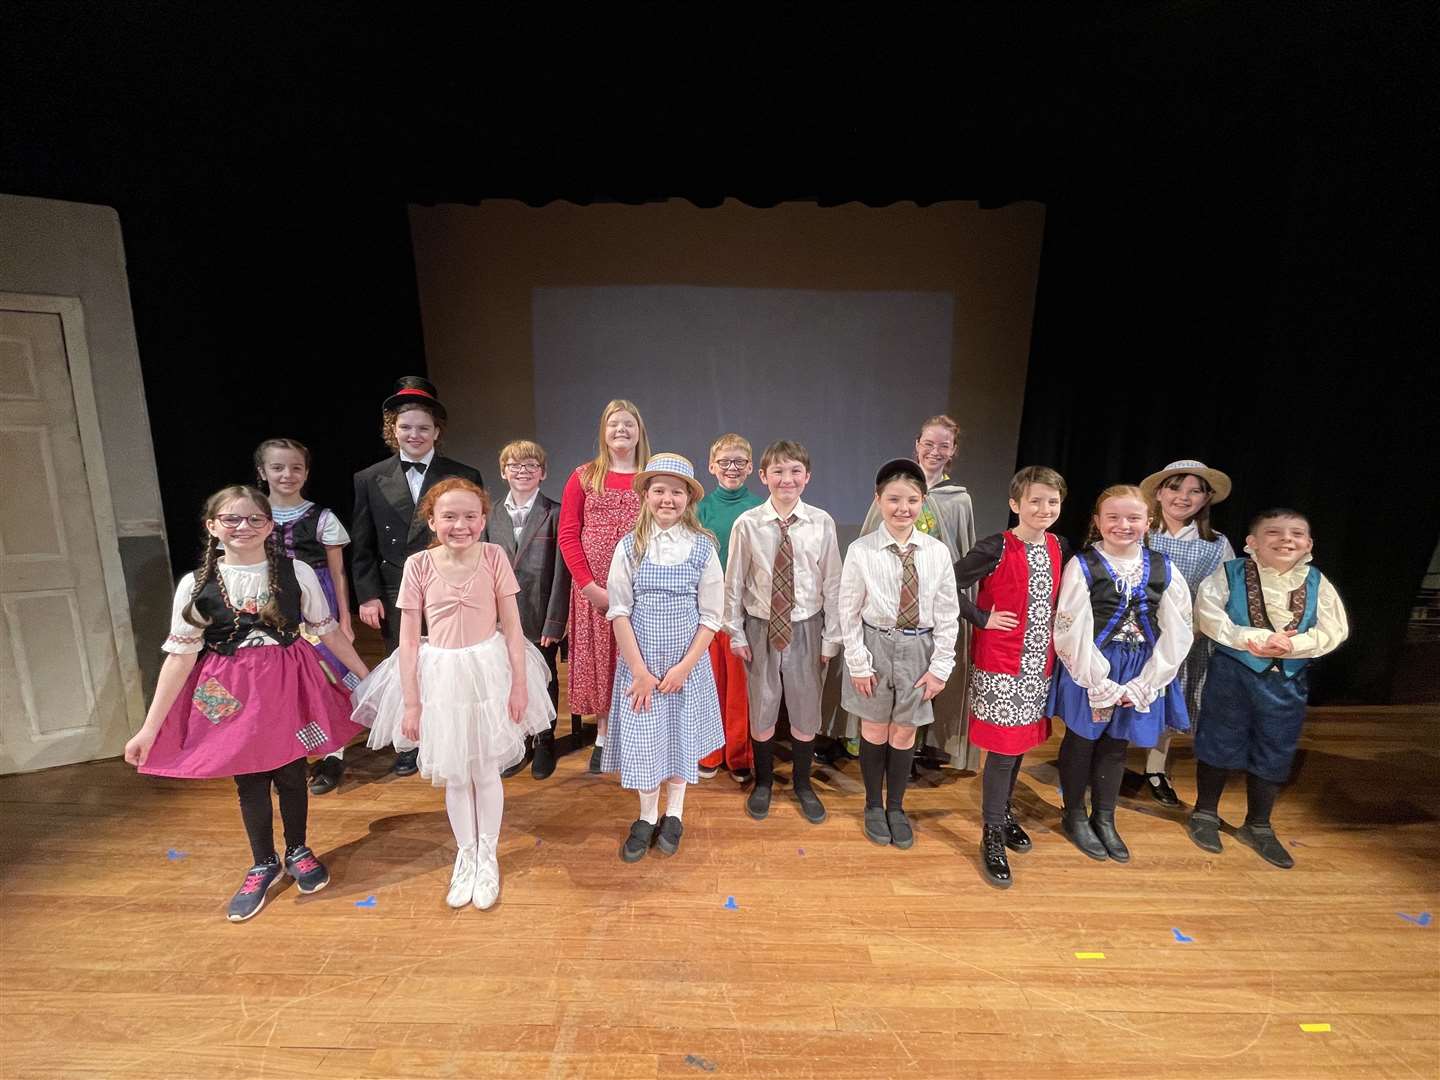 Thurso Juniors performed a non-competitive show with Mr Artigiano’s Puppet Show by Faye Sutherland.